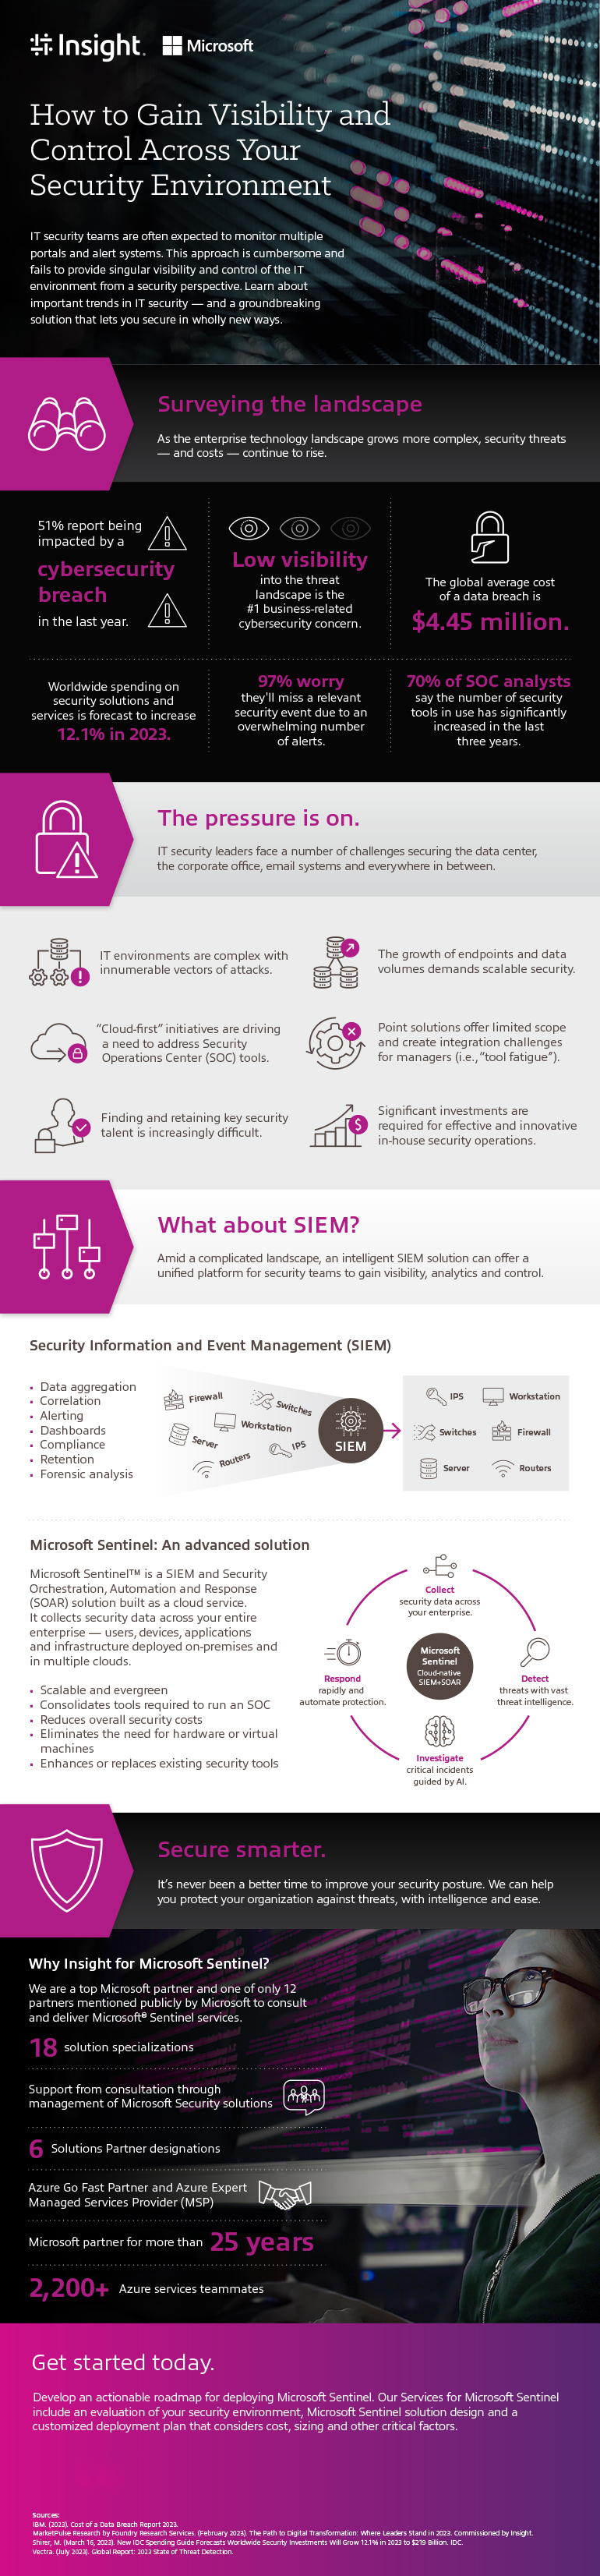 How to Gain Visibility and Control Across Your Security Environment infographic